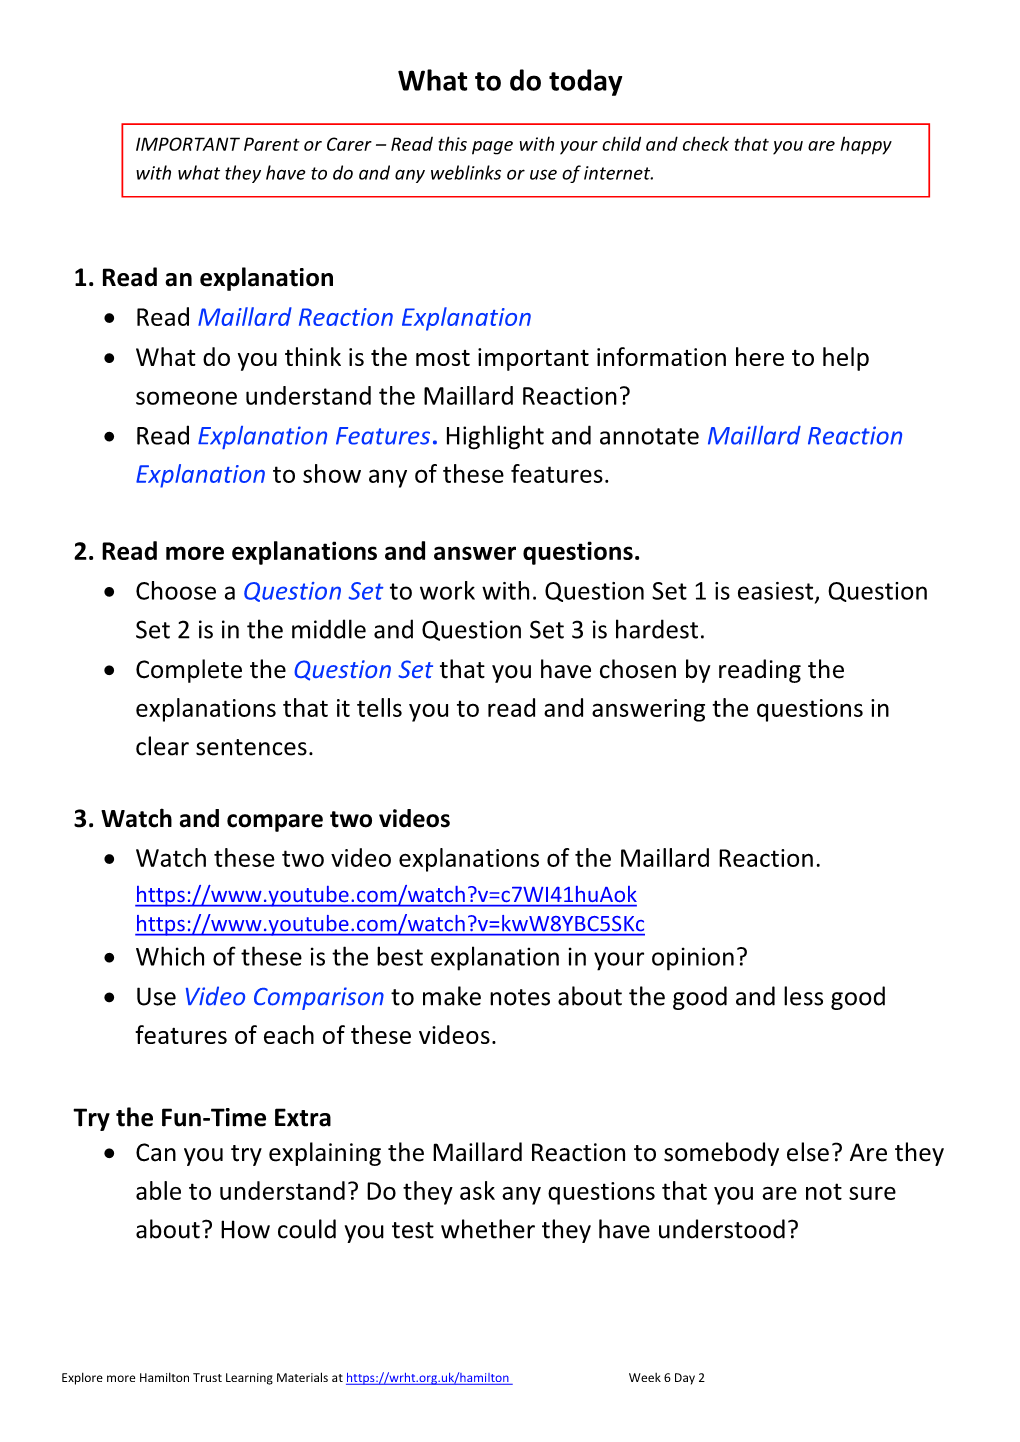 Maillard Reaction Explanation • What Do You Think Is the Most Important Information Here to Help Someone Understand the Maillard Reaction? • Read Explanation Features